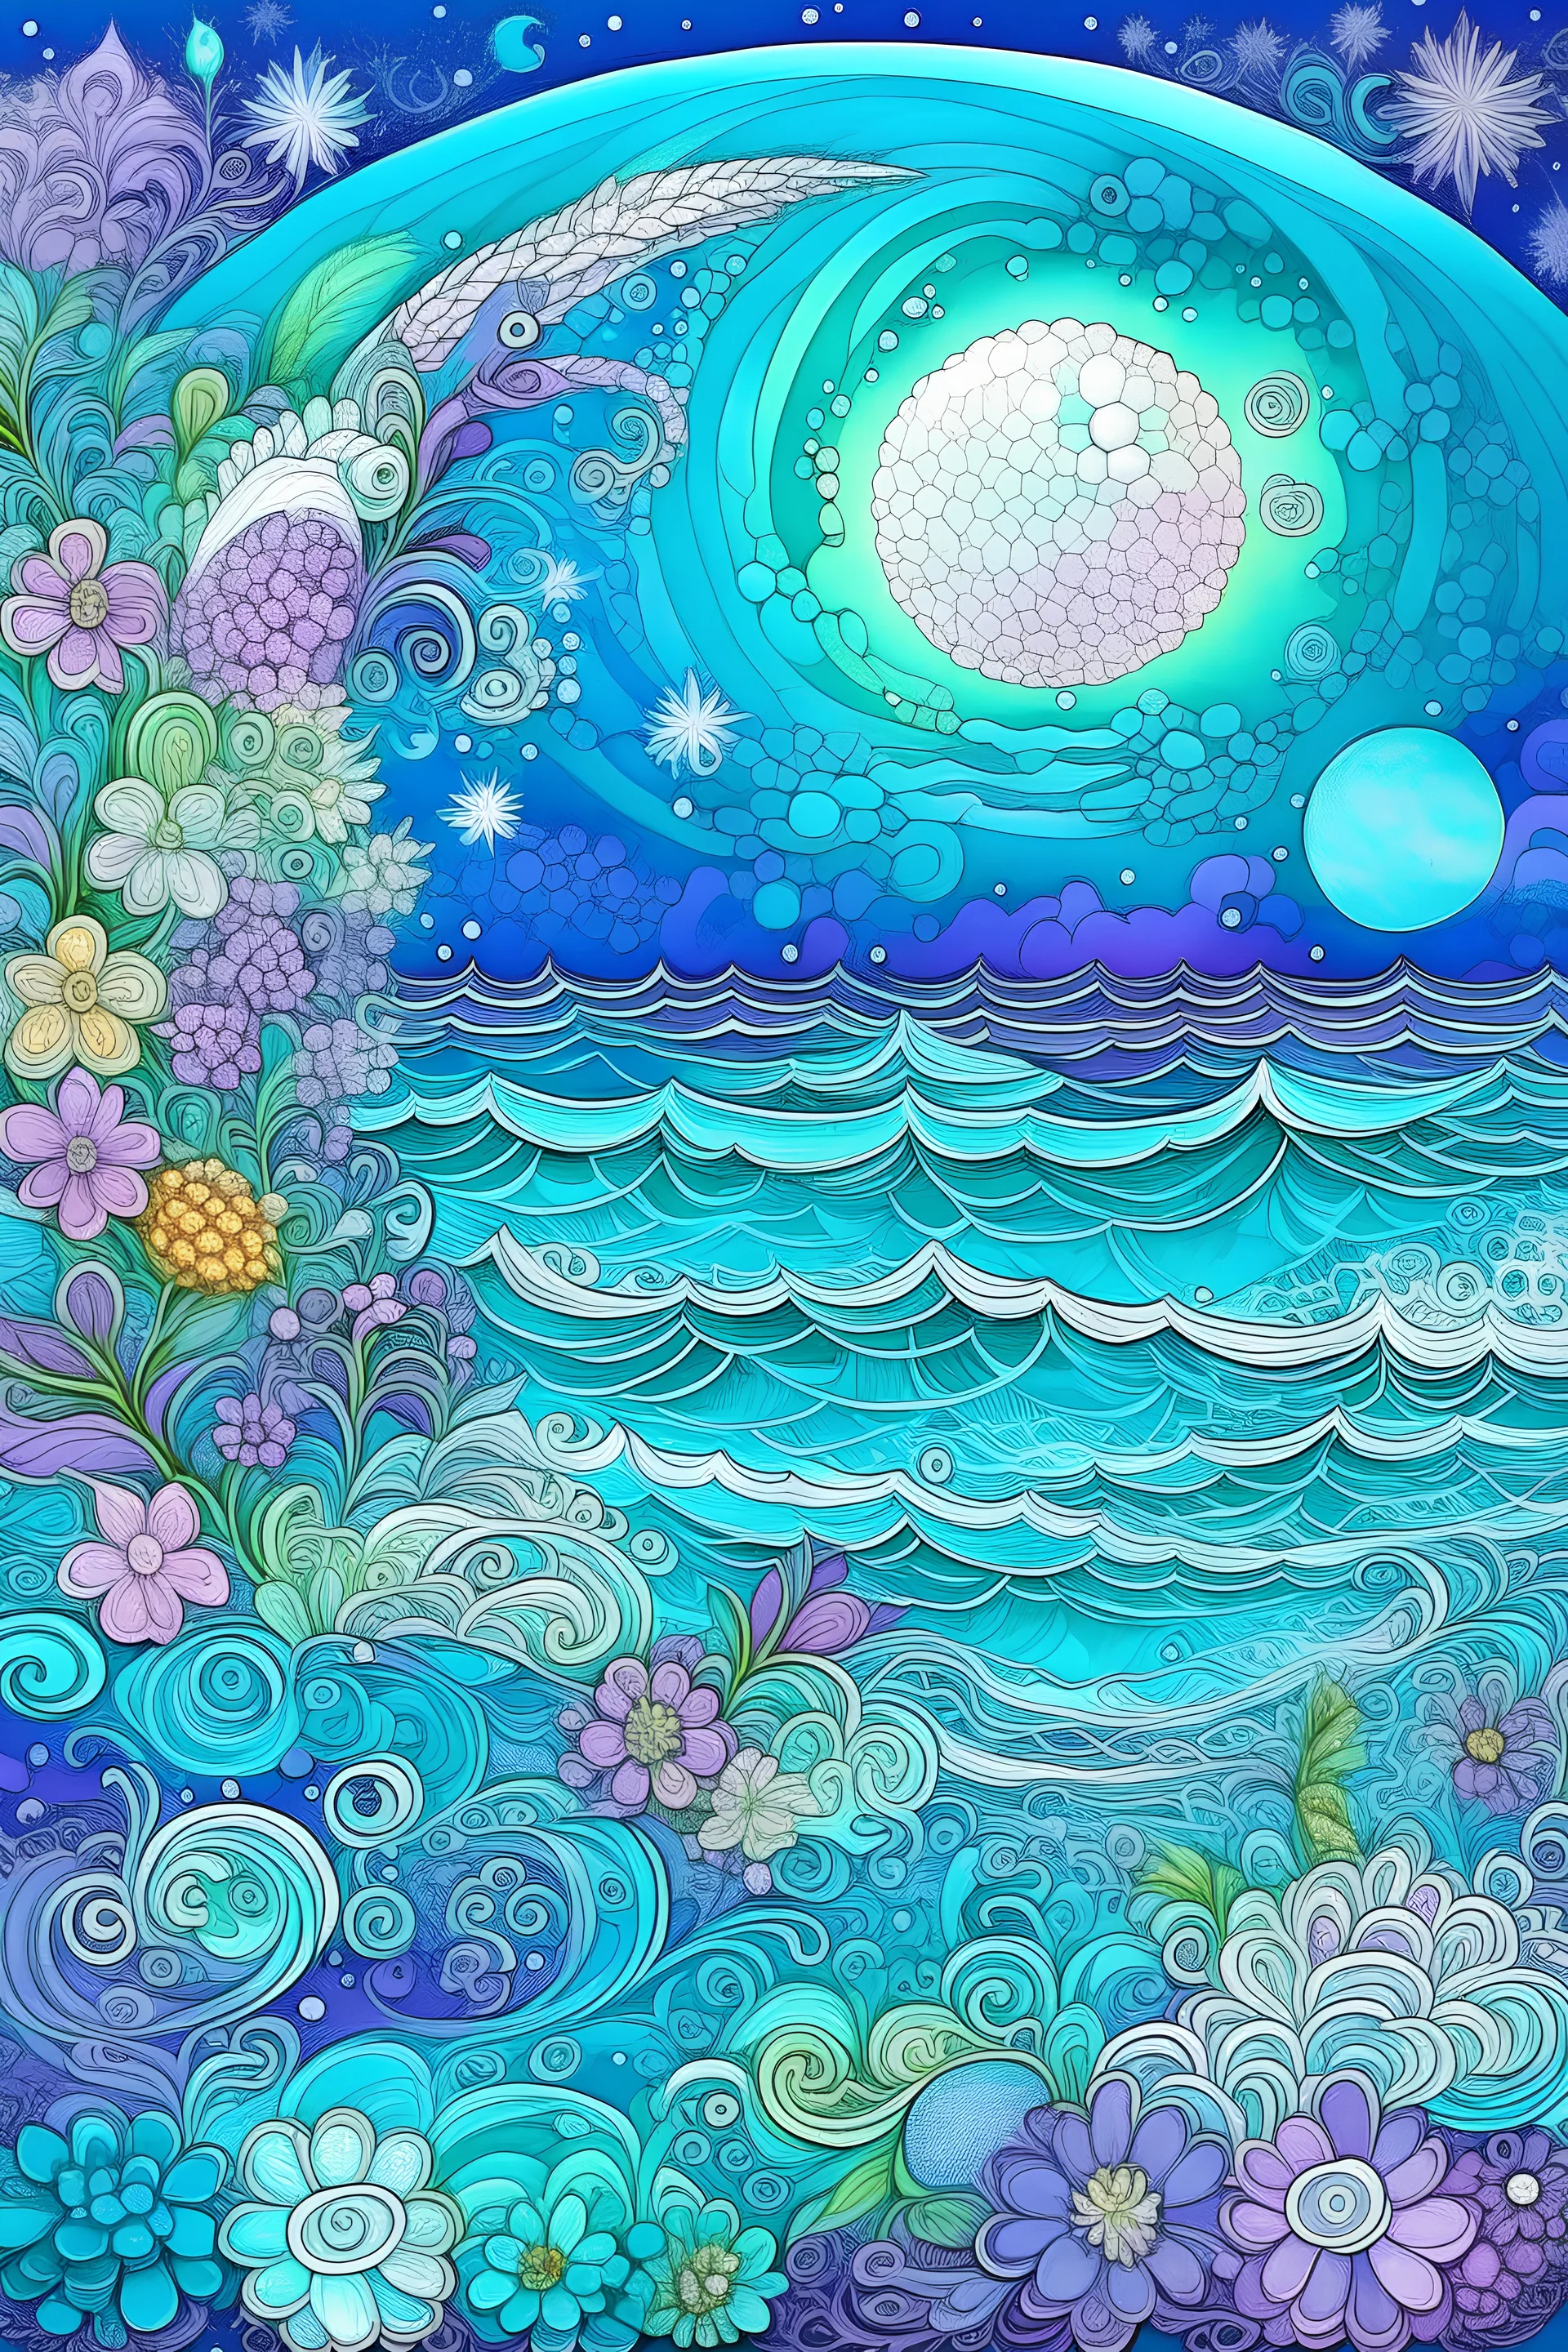 in the lilac-turquoise sea, waves in the sky beautiful rainbow flowers spiral patterns sparkling zentangle vortices, mother-of-pearl clouds, moon